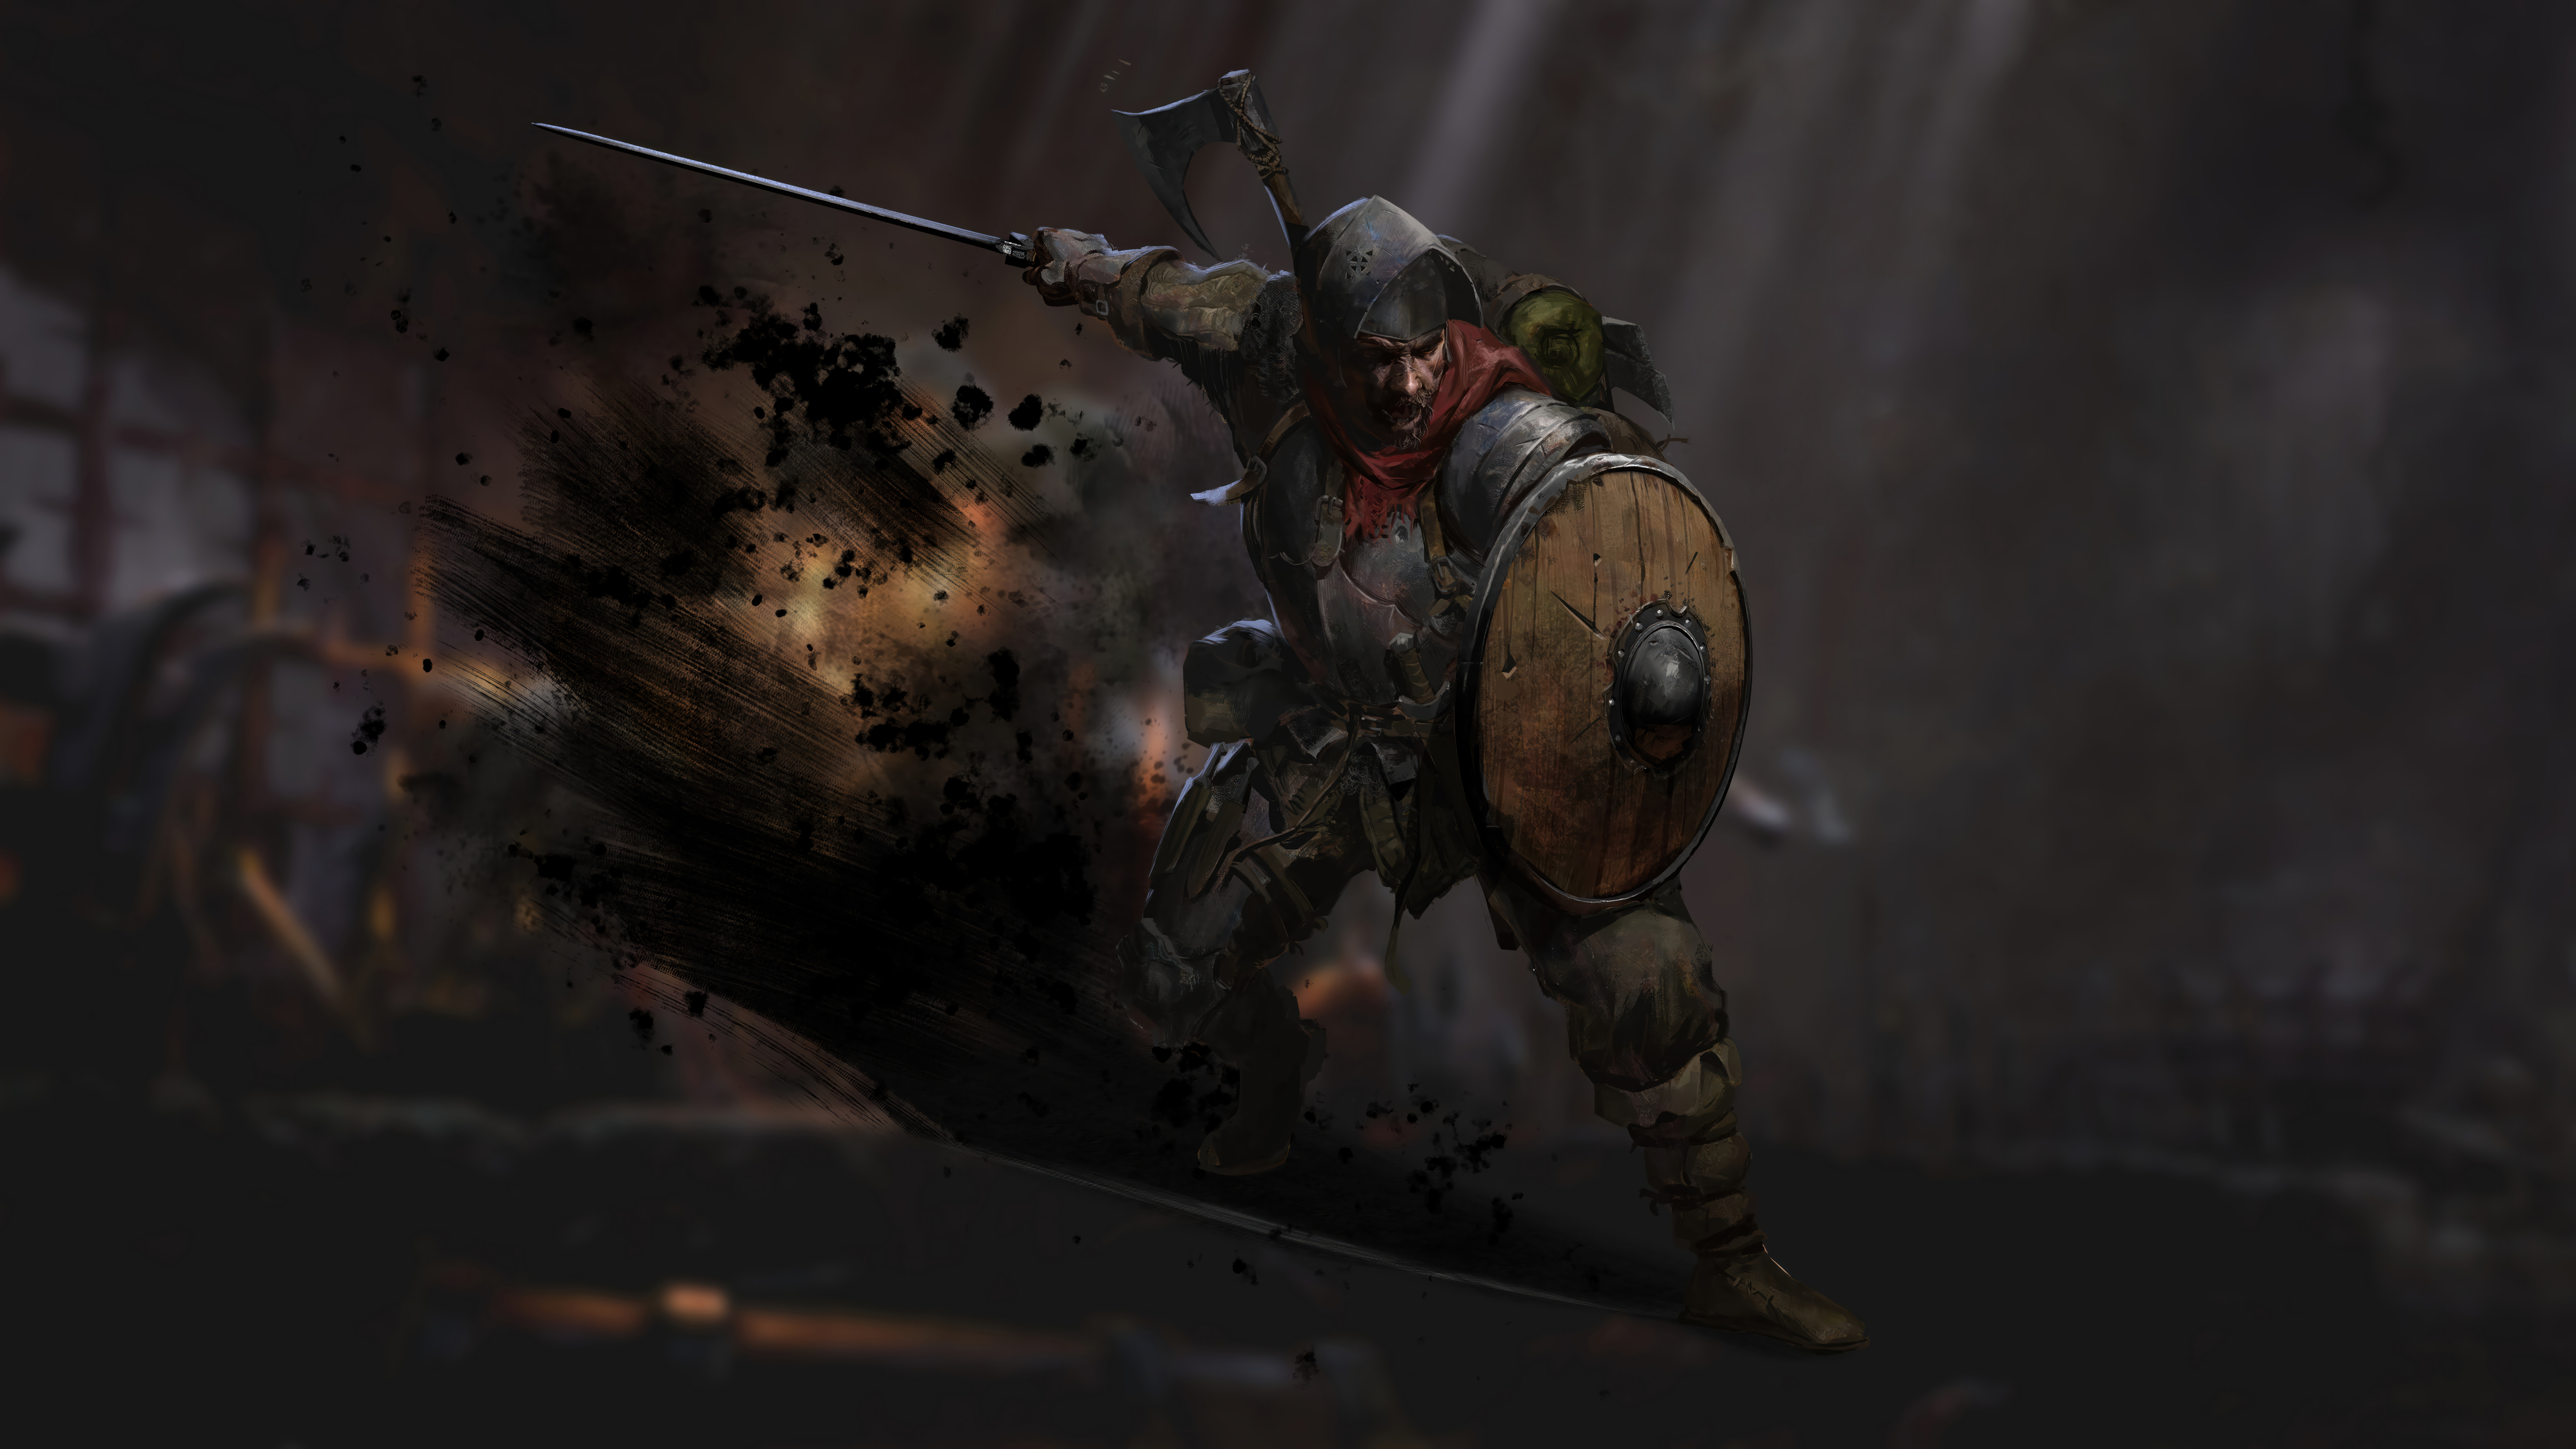 HD desktop wallpaper of a medieval knight in combat, featuring a dynamic pose with a sword and shield, themed with 'Dark and Darker' aesthetics for a background.